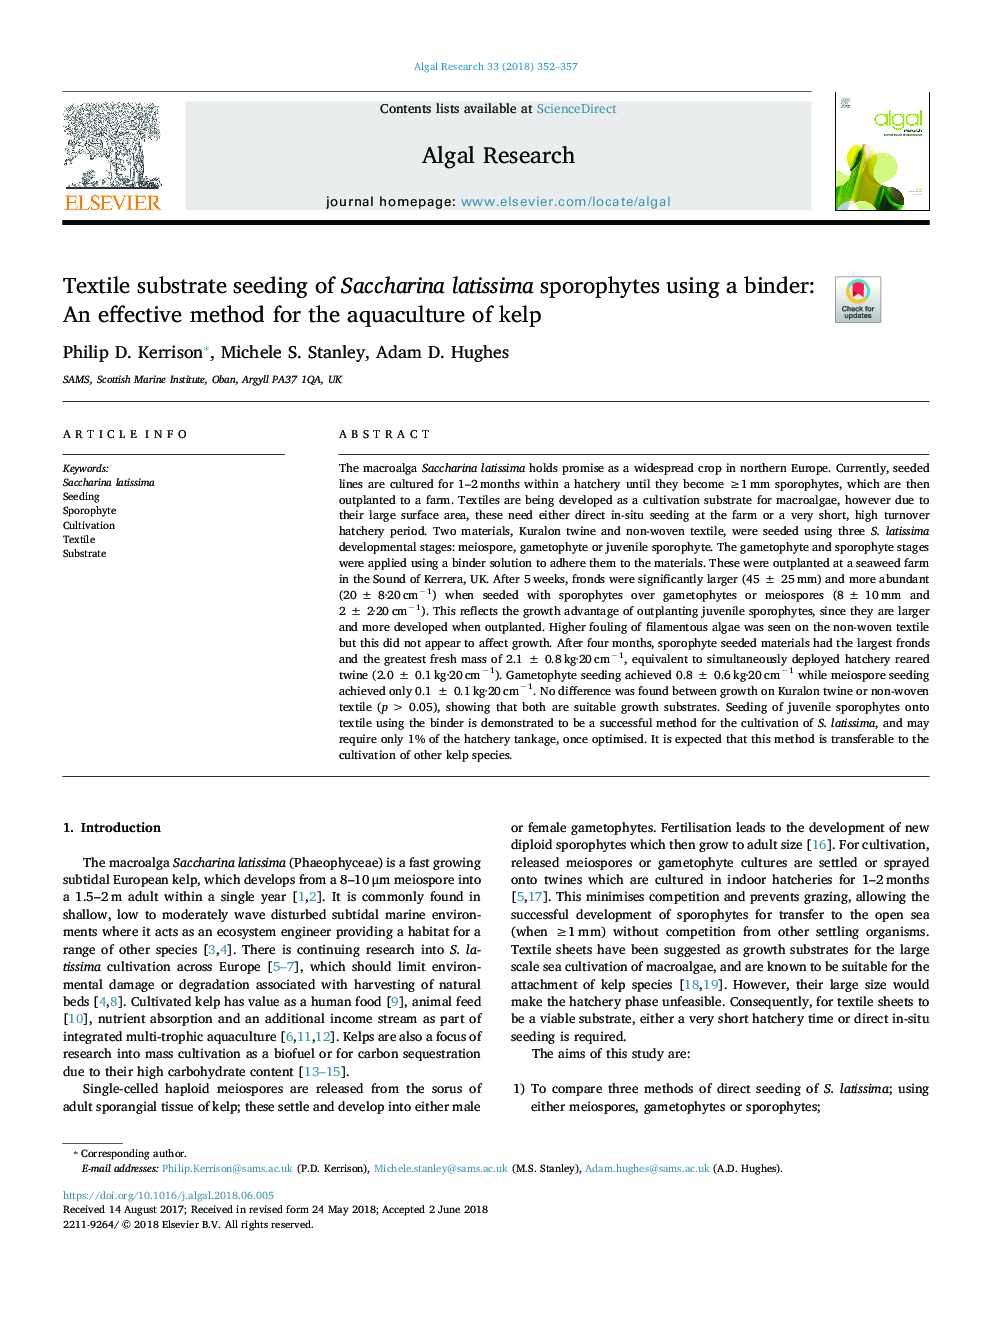 Textile substrate seeding of Saccharina latissima sporophytes using a binder: An effective method for the aquaculture of kelp